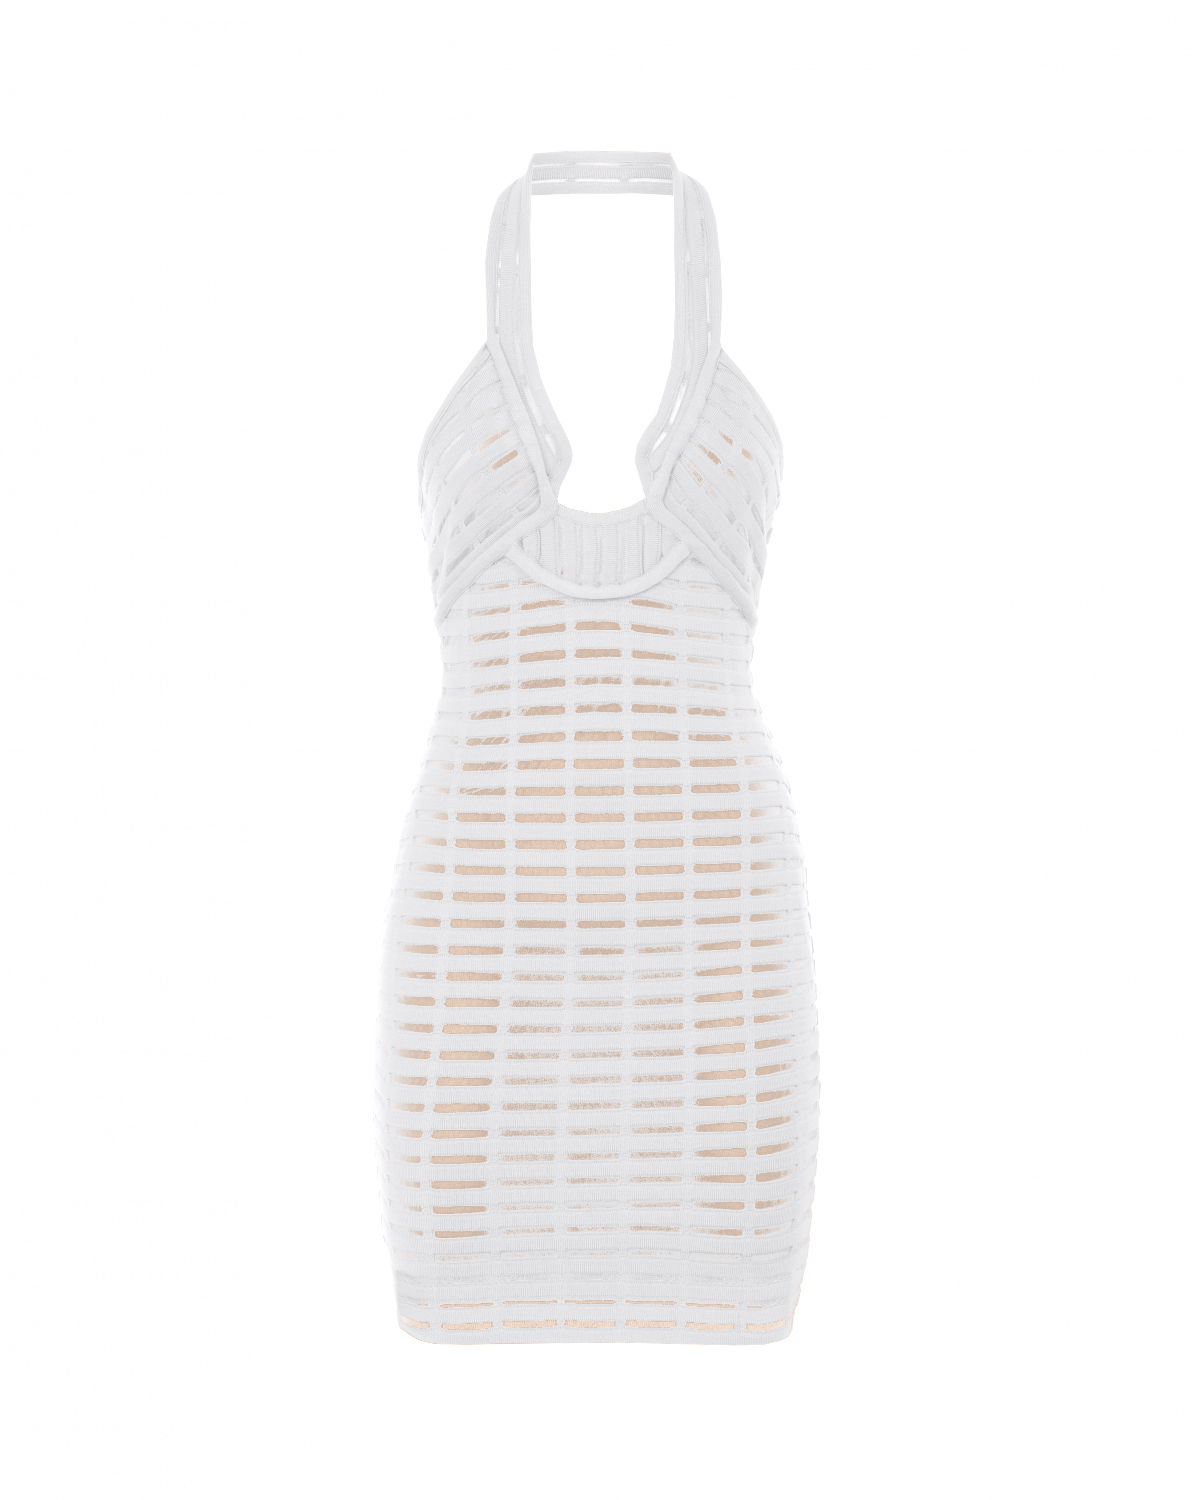 White iconic dress with halter neckline | Iconic Capsule Collection | Genny